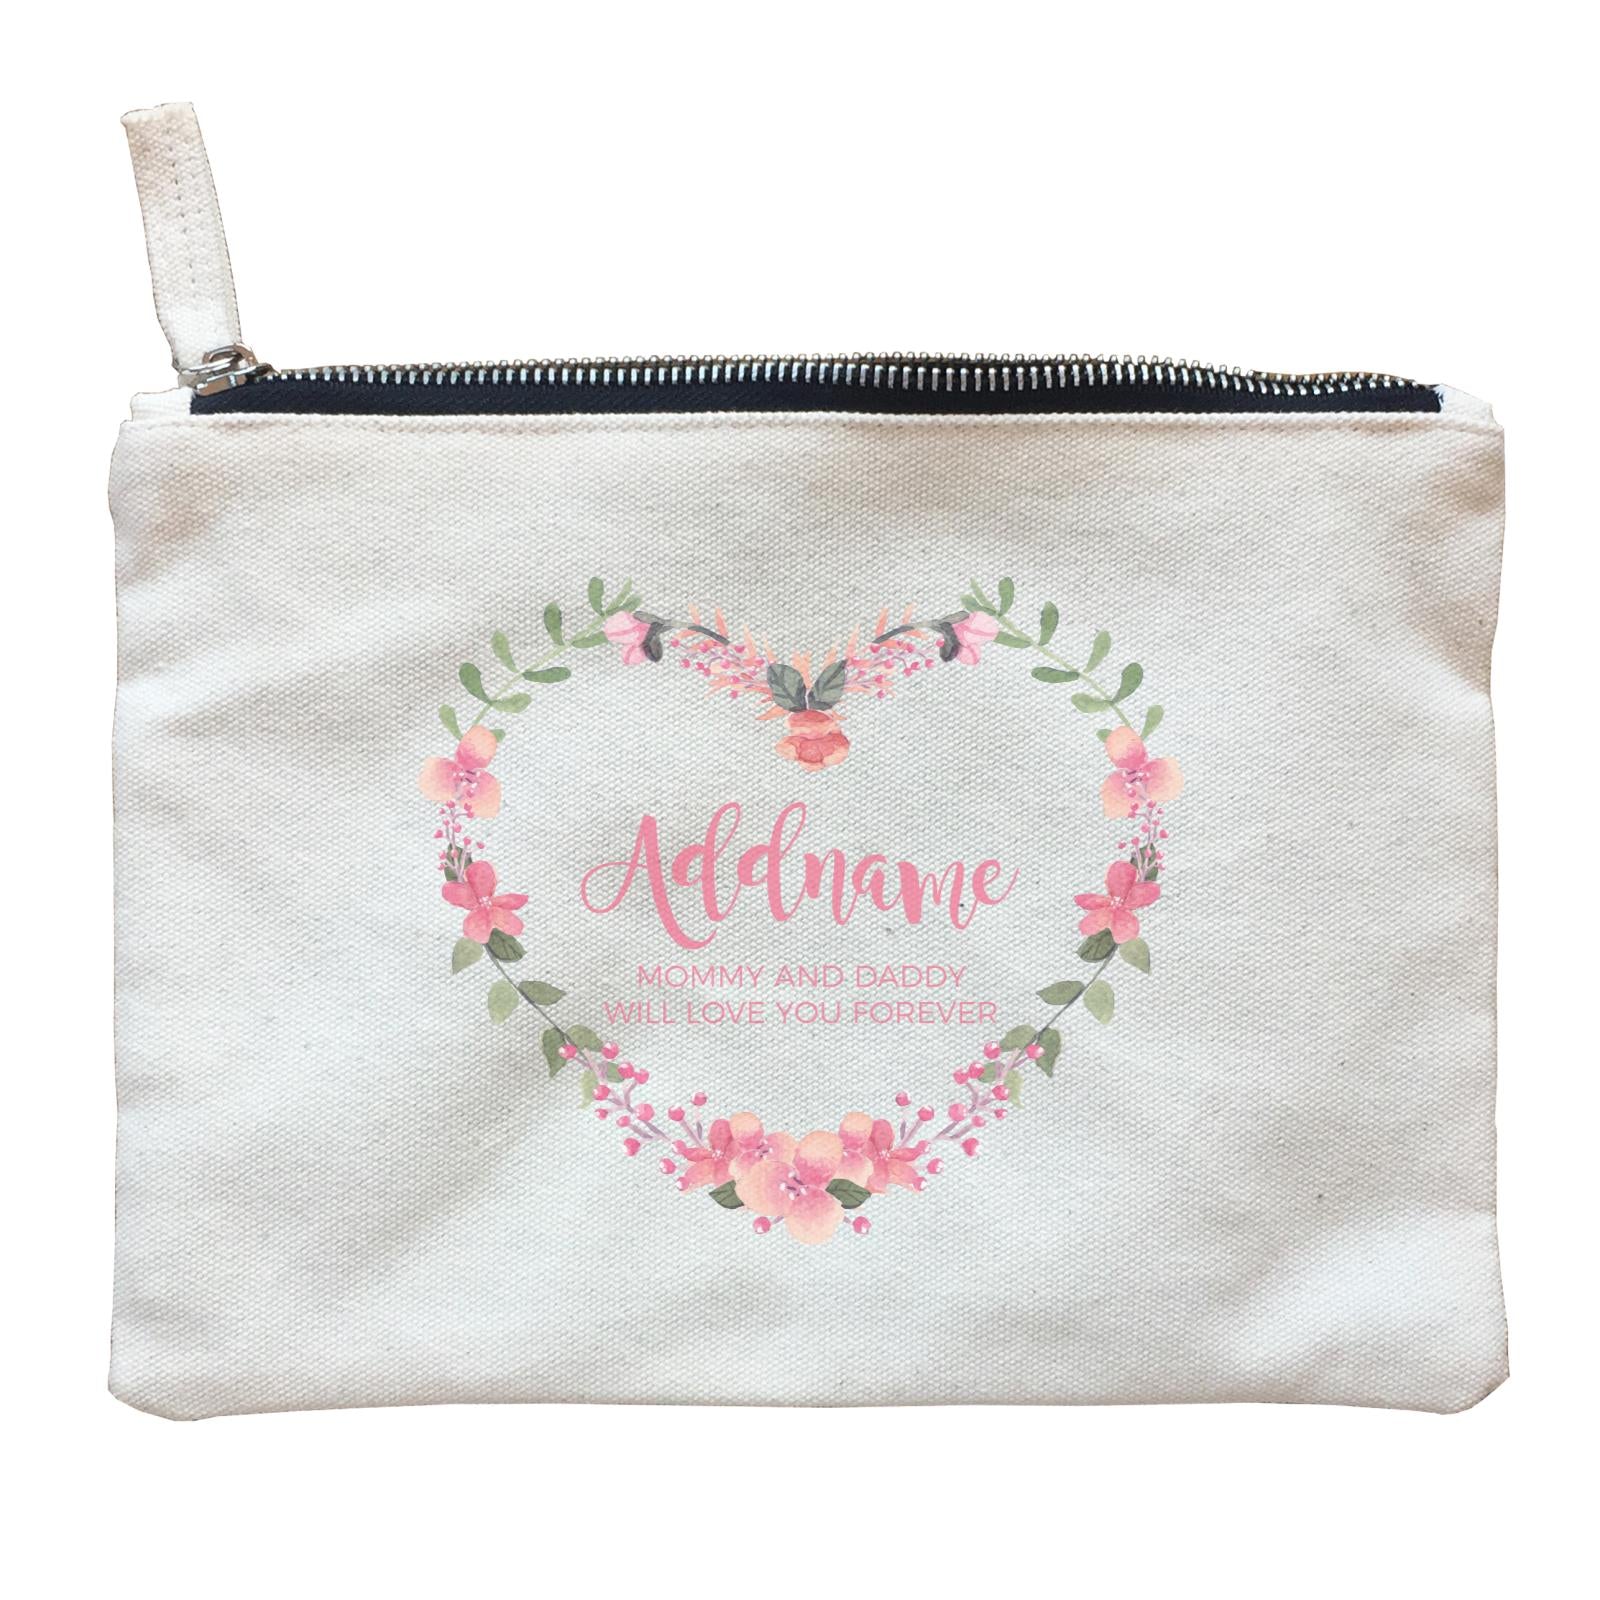 Pink Heart Shaped Flower Wreath Personalizable with Name and Text Zipper Pouch